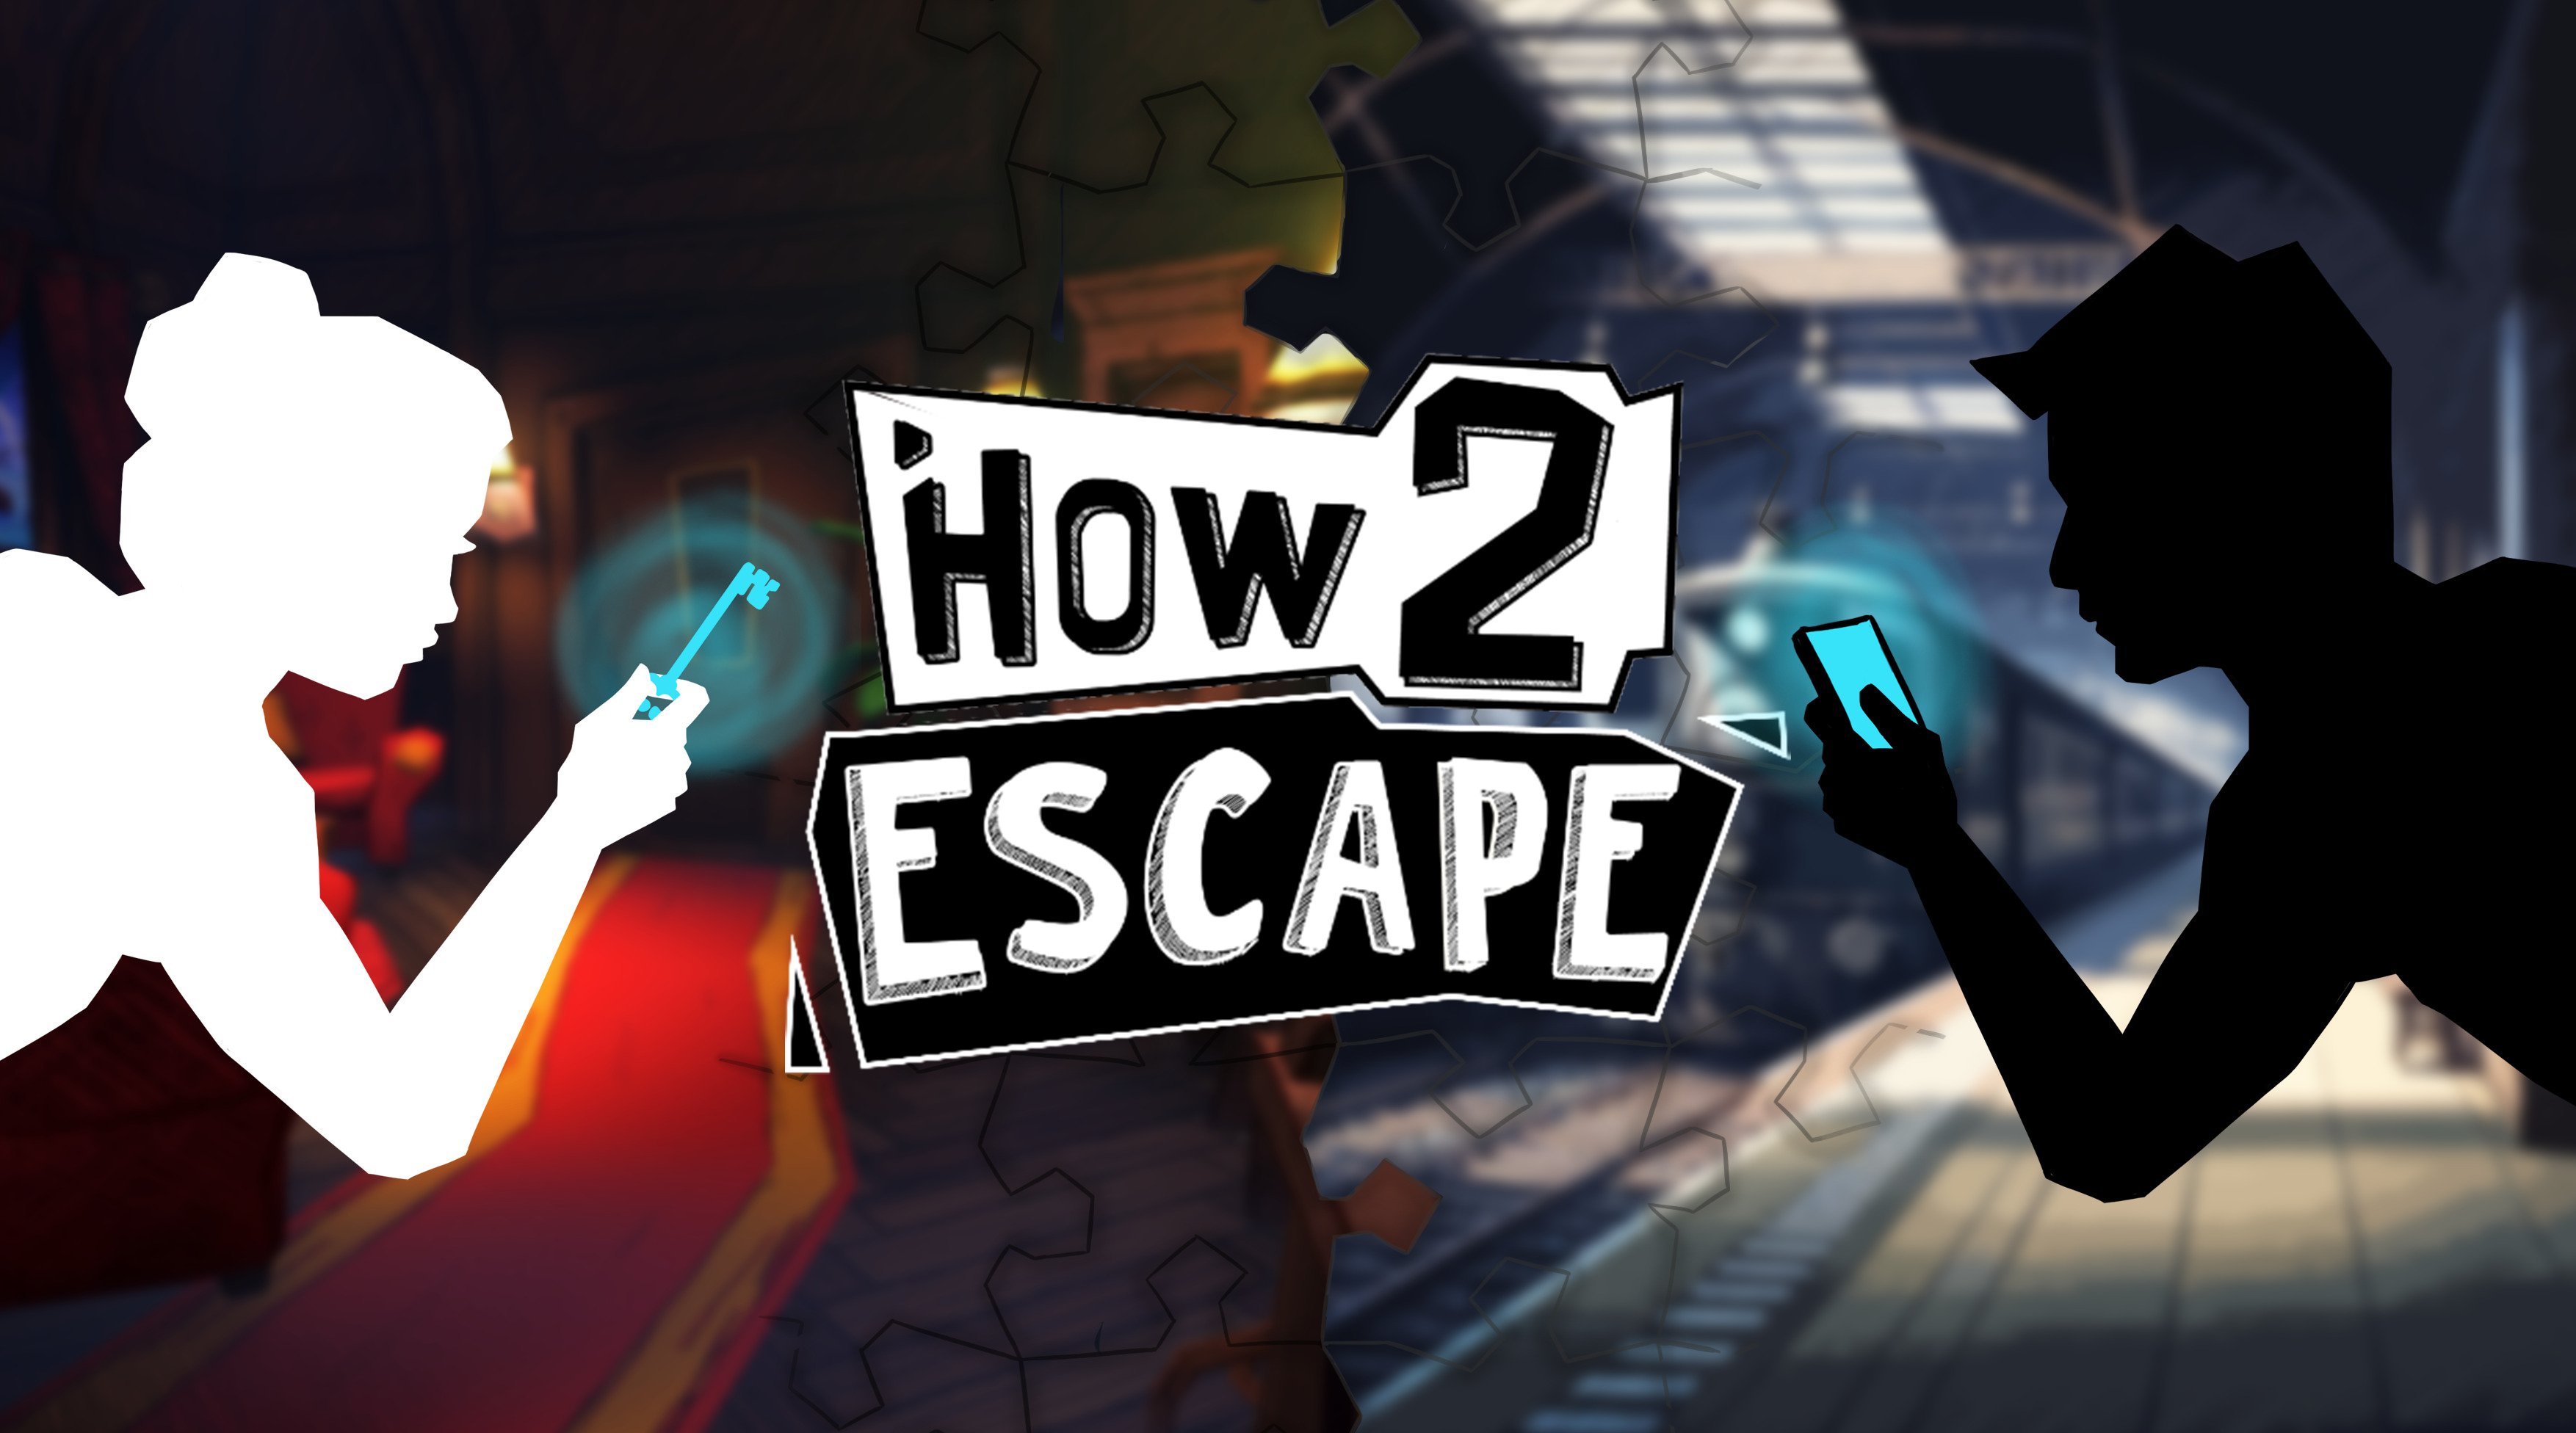 Play Prison Escape Puzzle Adventure Online for Free on PC & Mobile